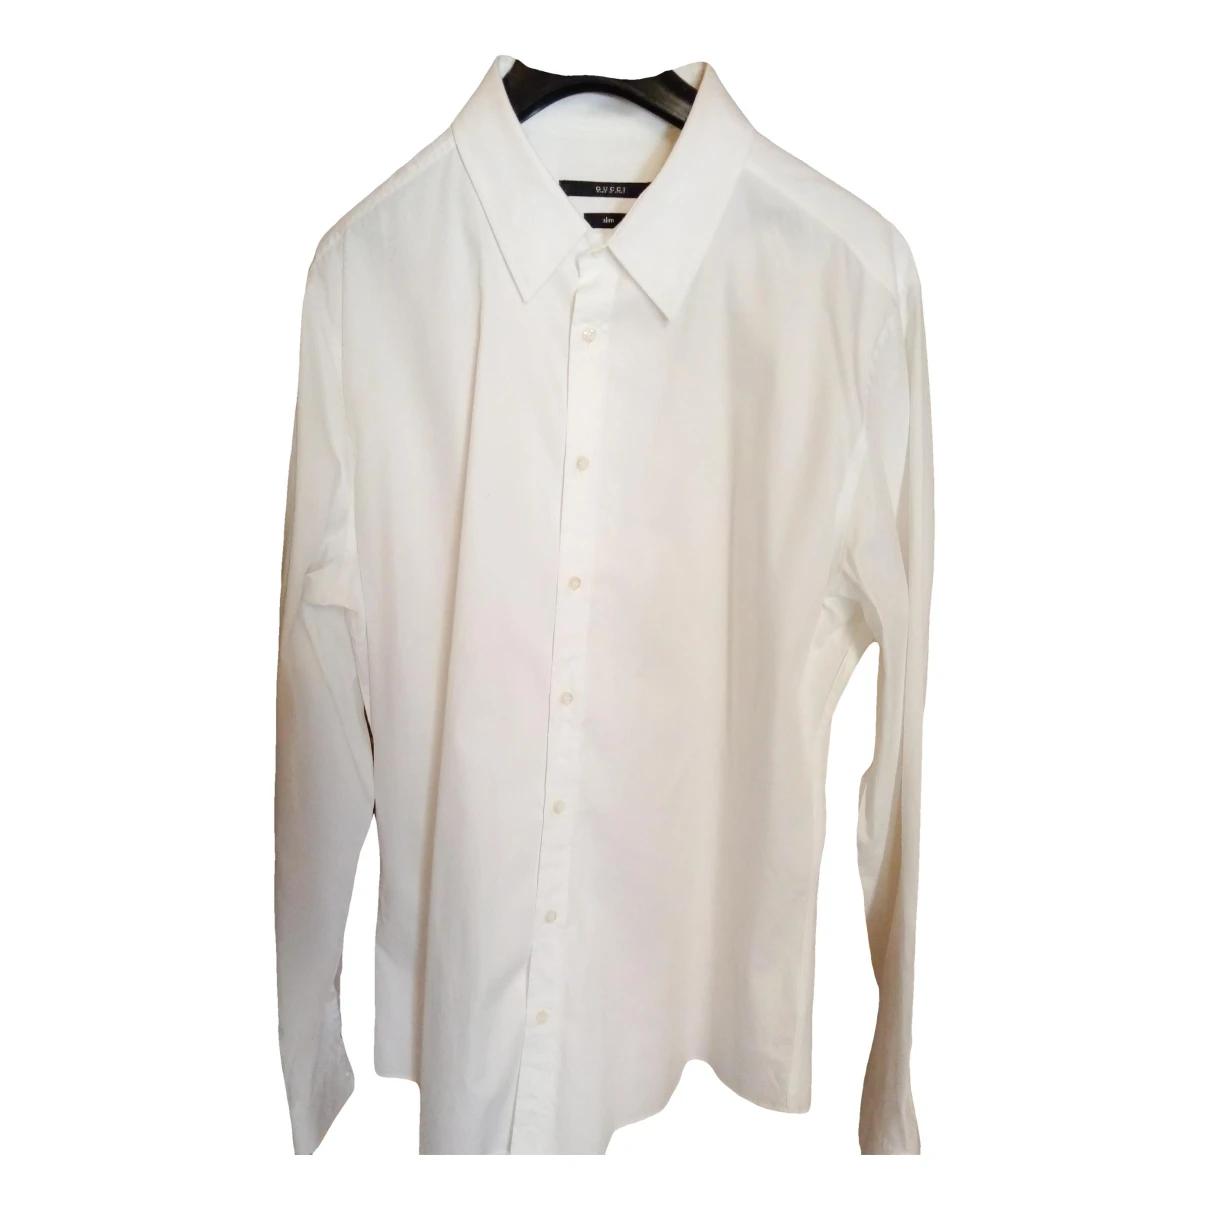 clothing Gucci shirts for Male Cotton L International. Used condition